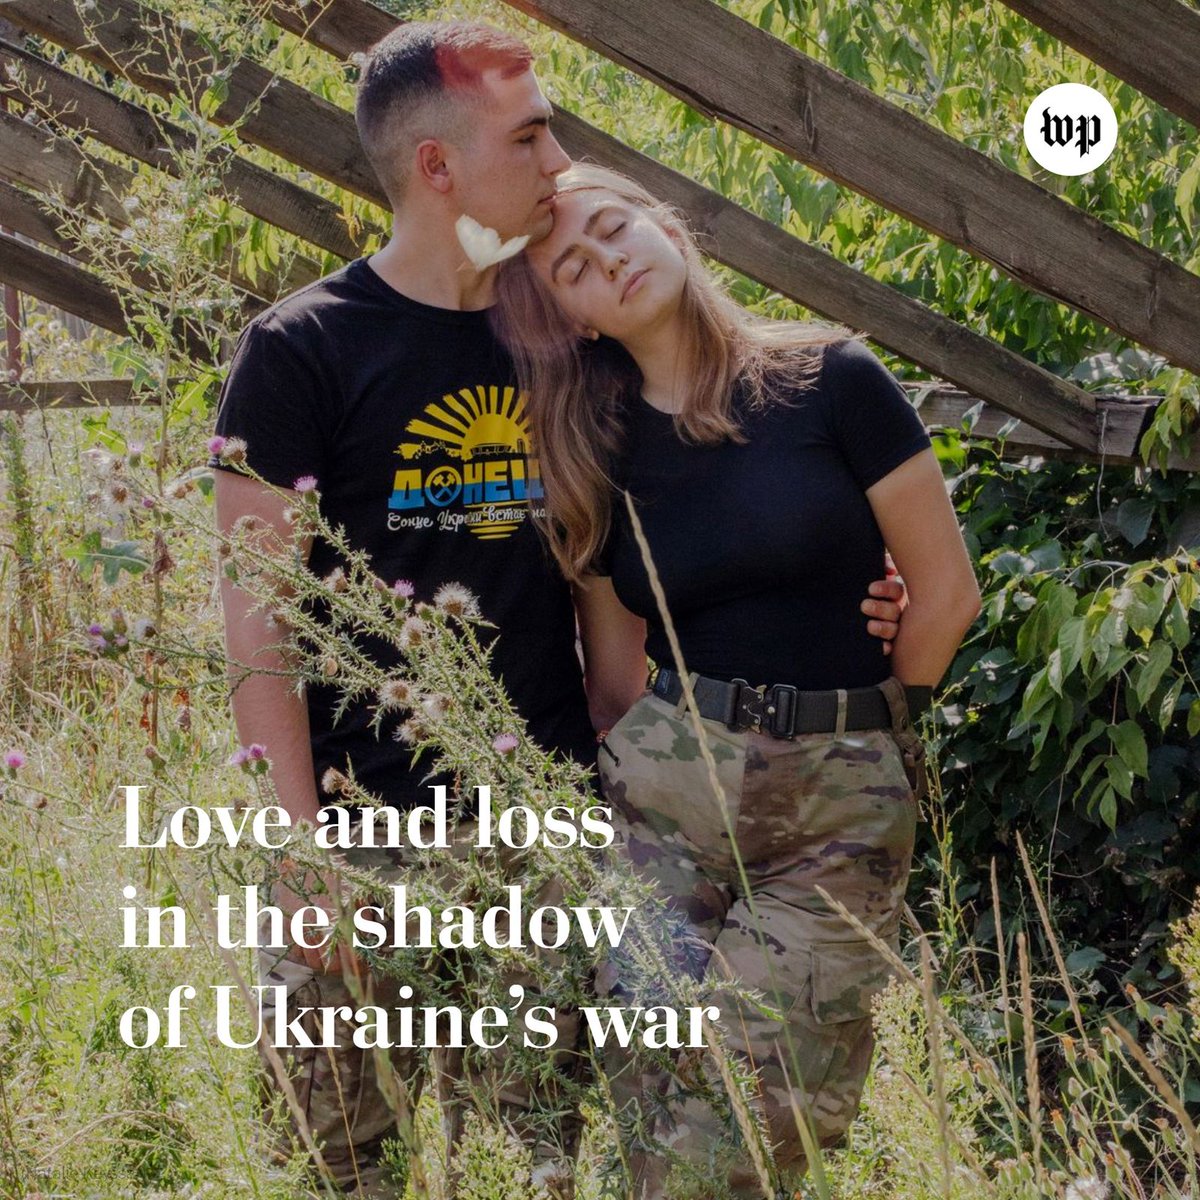 Since Russia’s invasion began, Ukrainian lives have been transformed — by violence and loss. Photographer Natalie Keyssar’s photos attempt to pay homage to the bonds of love that each soldier is fighting for and the terror of losing those they love most. wapo.st/3OL76Yu